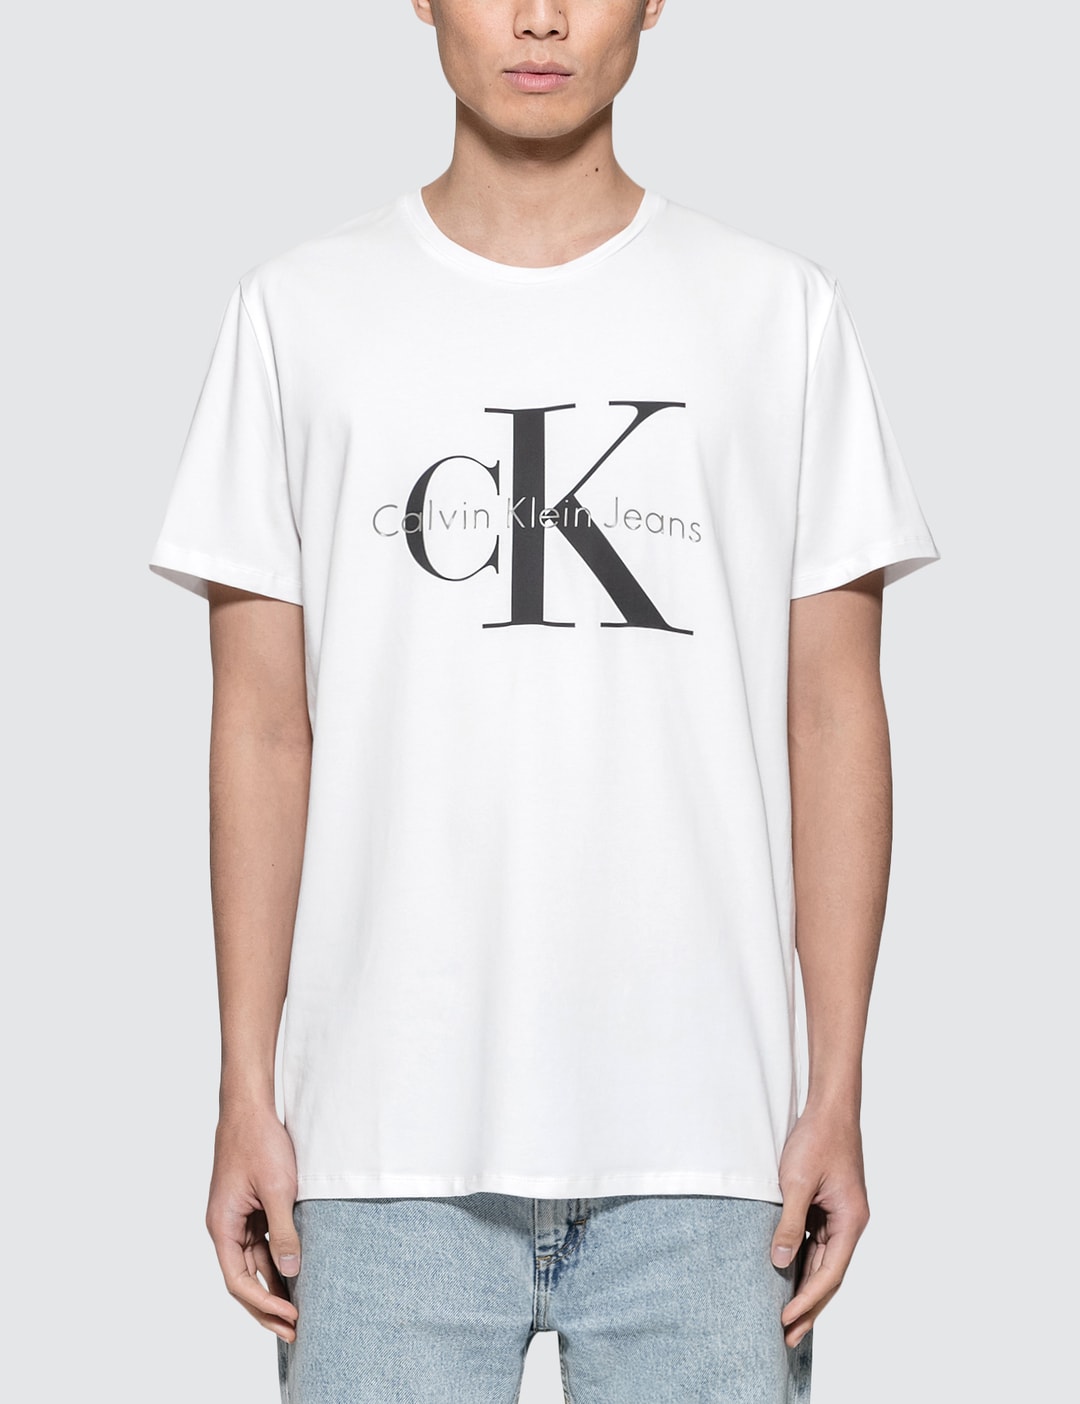 Globally by Klein Hypebeast Lifestyle - Calvin Jeans S/S - and | HBX CK Fashion Curated Slim T-Shirt Logo